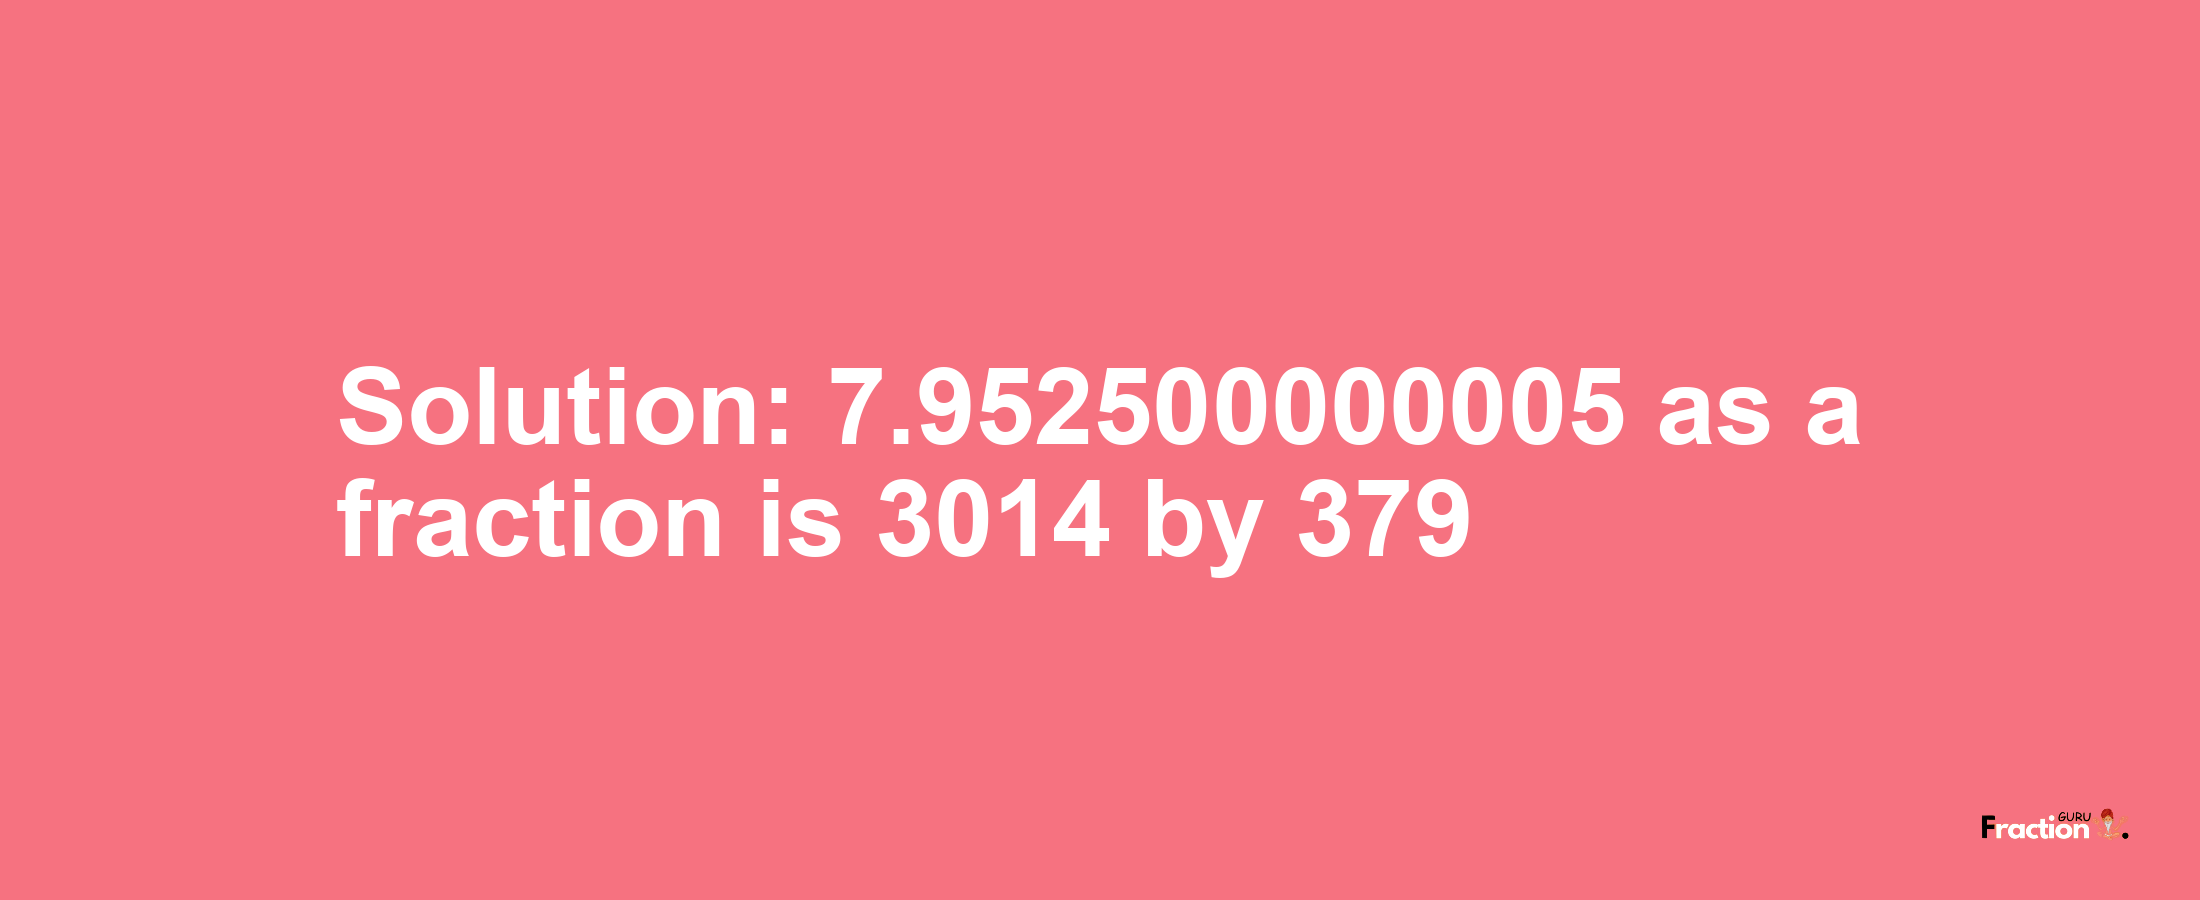 Solution:7.952500000005 as a fraction is 3014/379